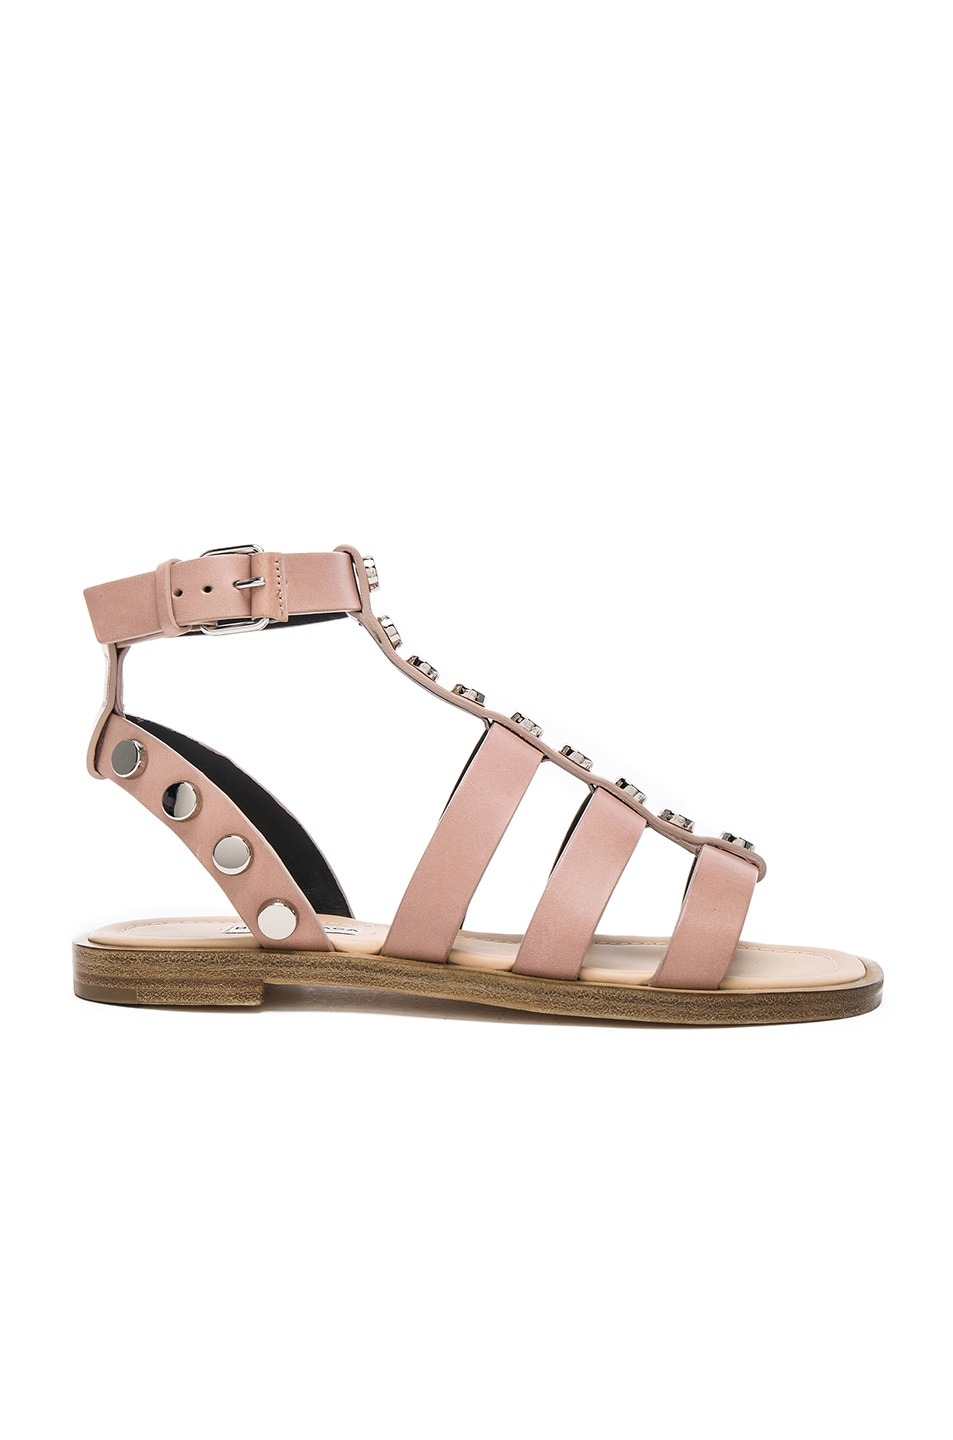 Image 1 of Balenciaga Studded Leather Gladiator Sandals in Beige Sienne